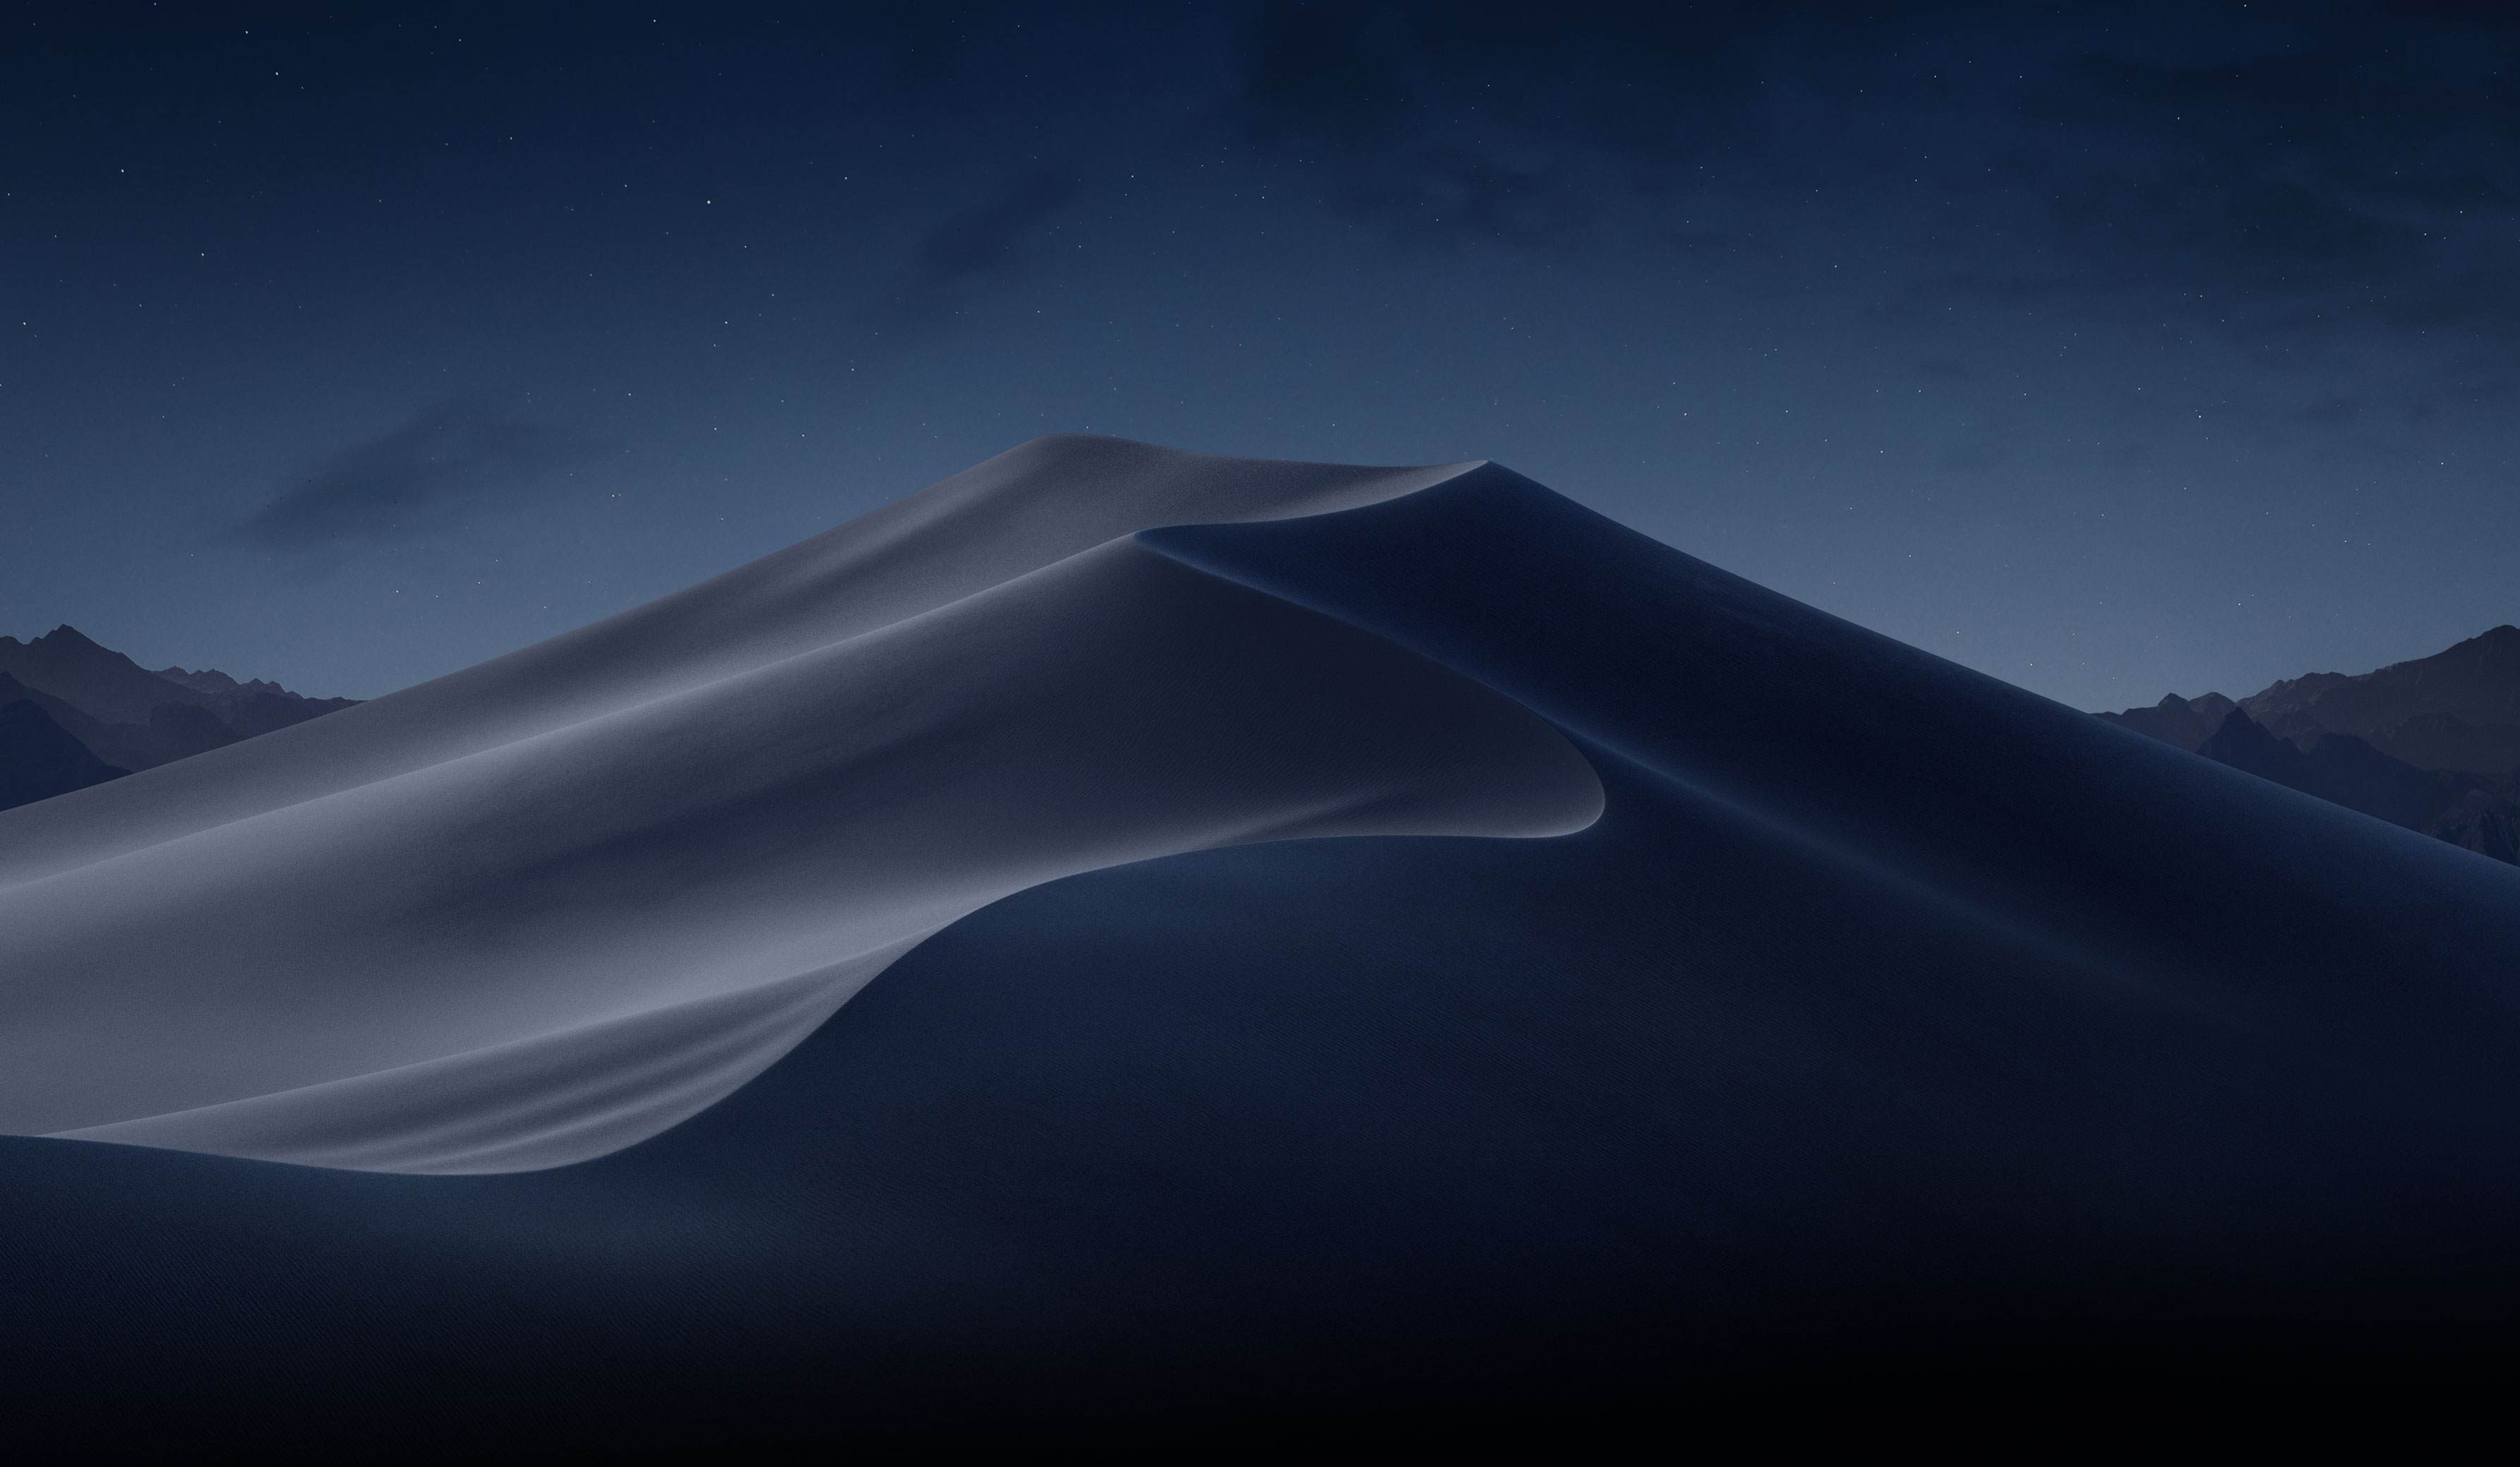 Official macOS Mojave Wallpaper